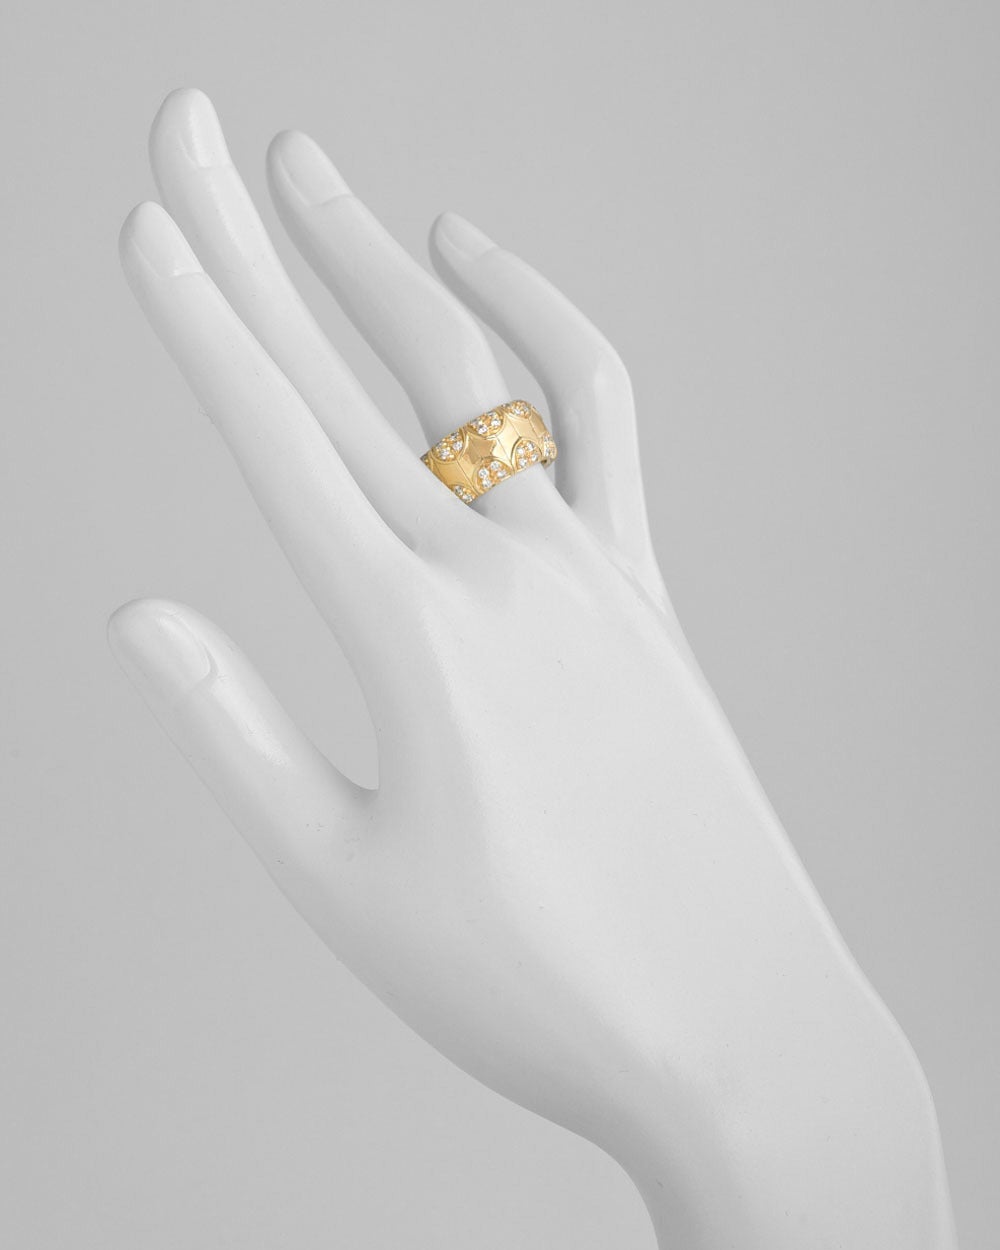 Wide band ring, designed from polished yellow gold 'panels' with a pavé diamond scalloped trim, in 18k gold, the band measuring approximately 10.5mm in width, numbered 35483, signed Boucheron. Size 6.75.